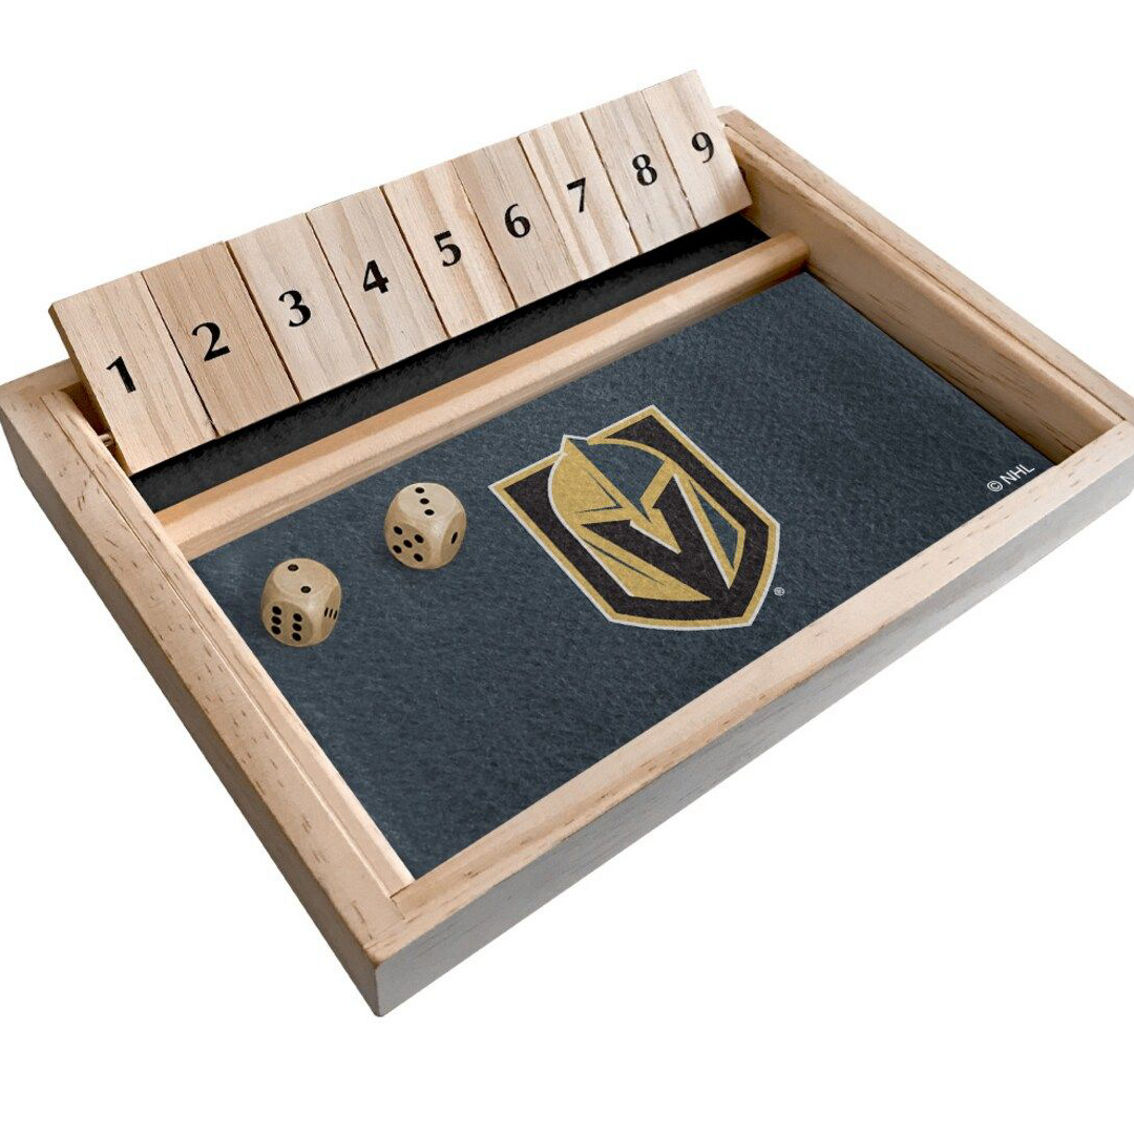 Victory Tailgate Vegas Golden Knights Shut The Box Game - Image 2 of 2